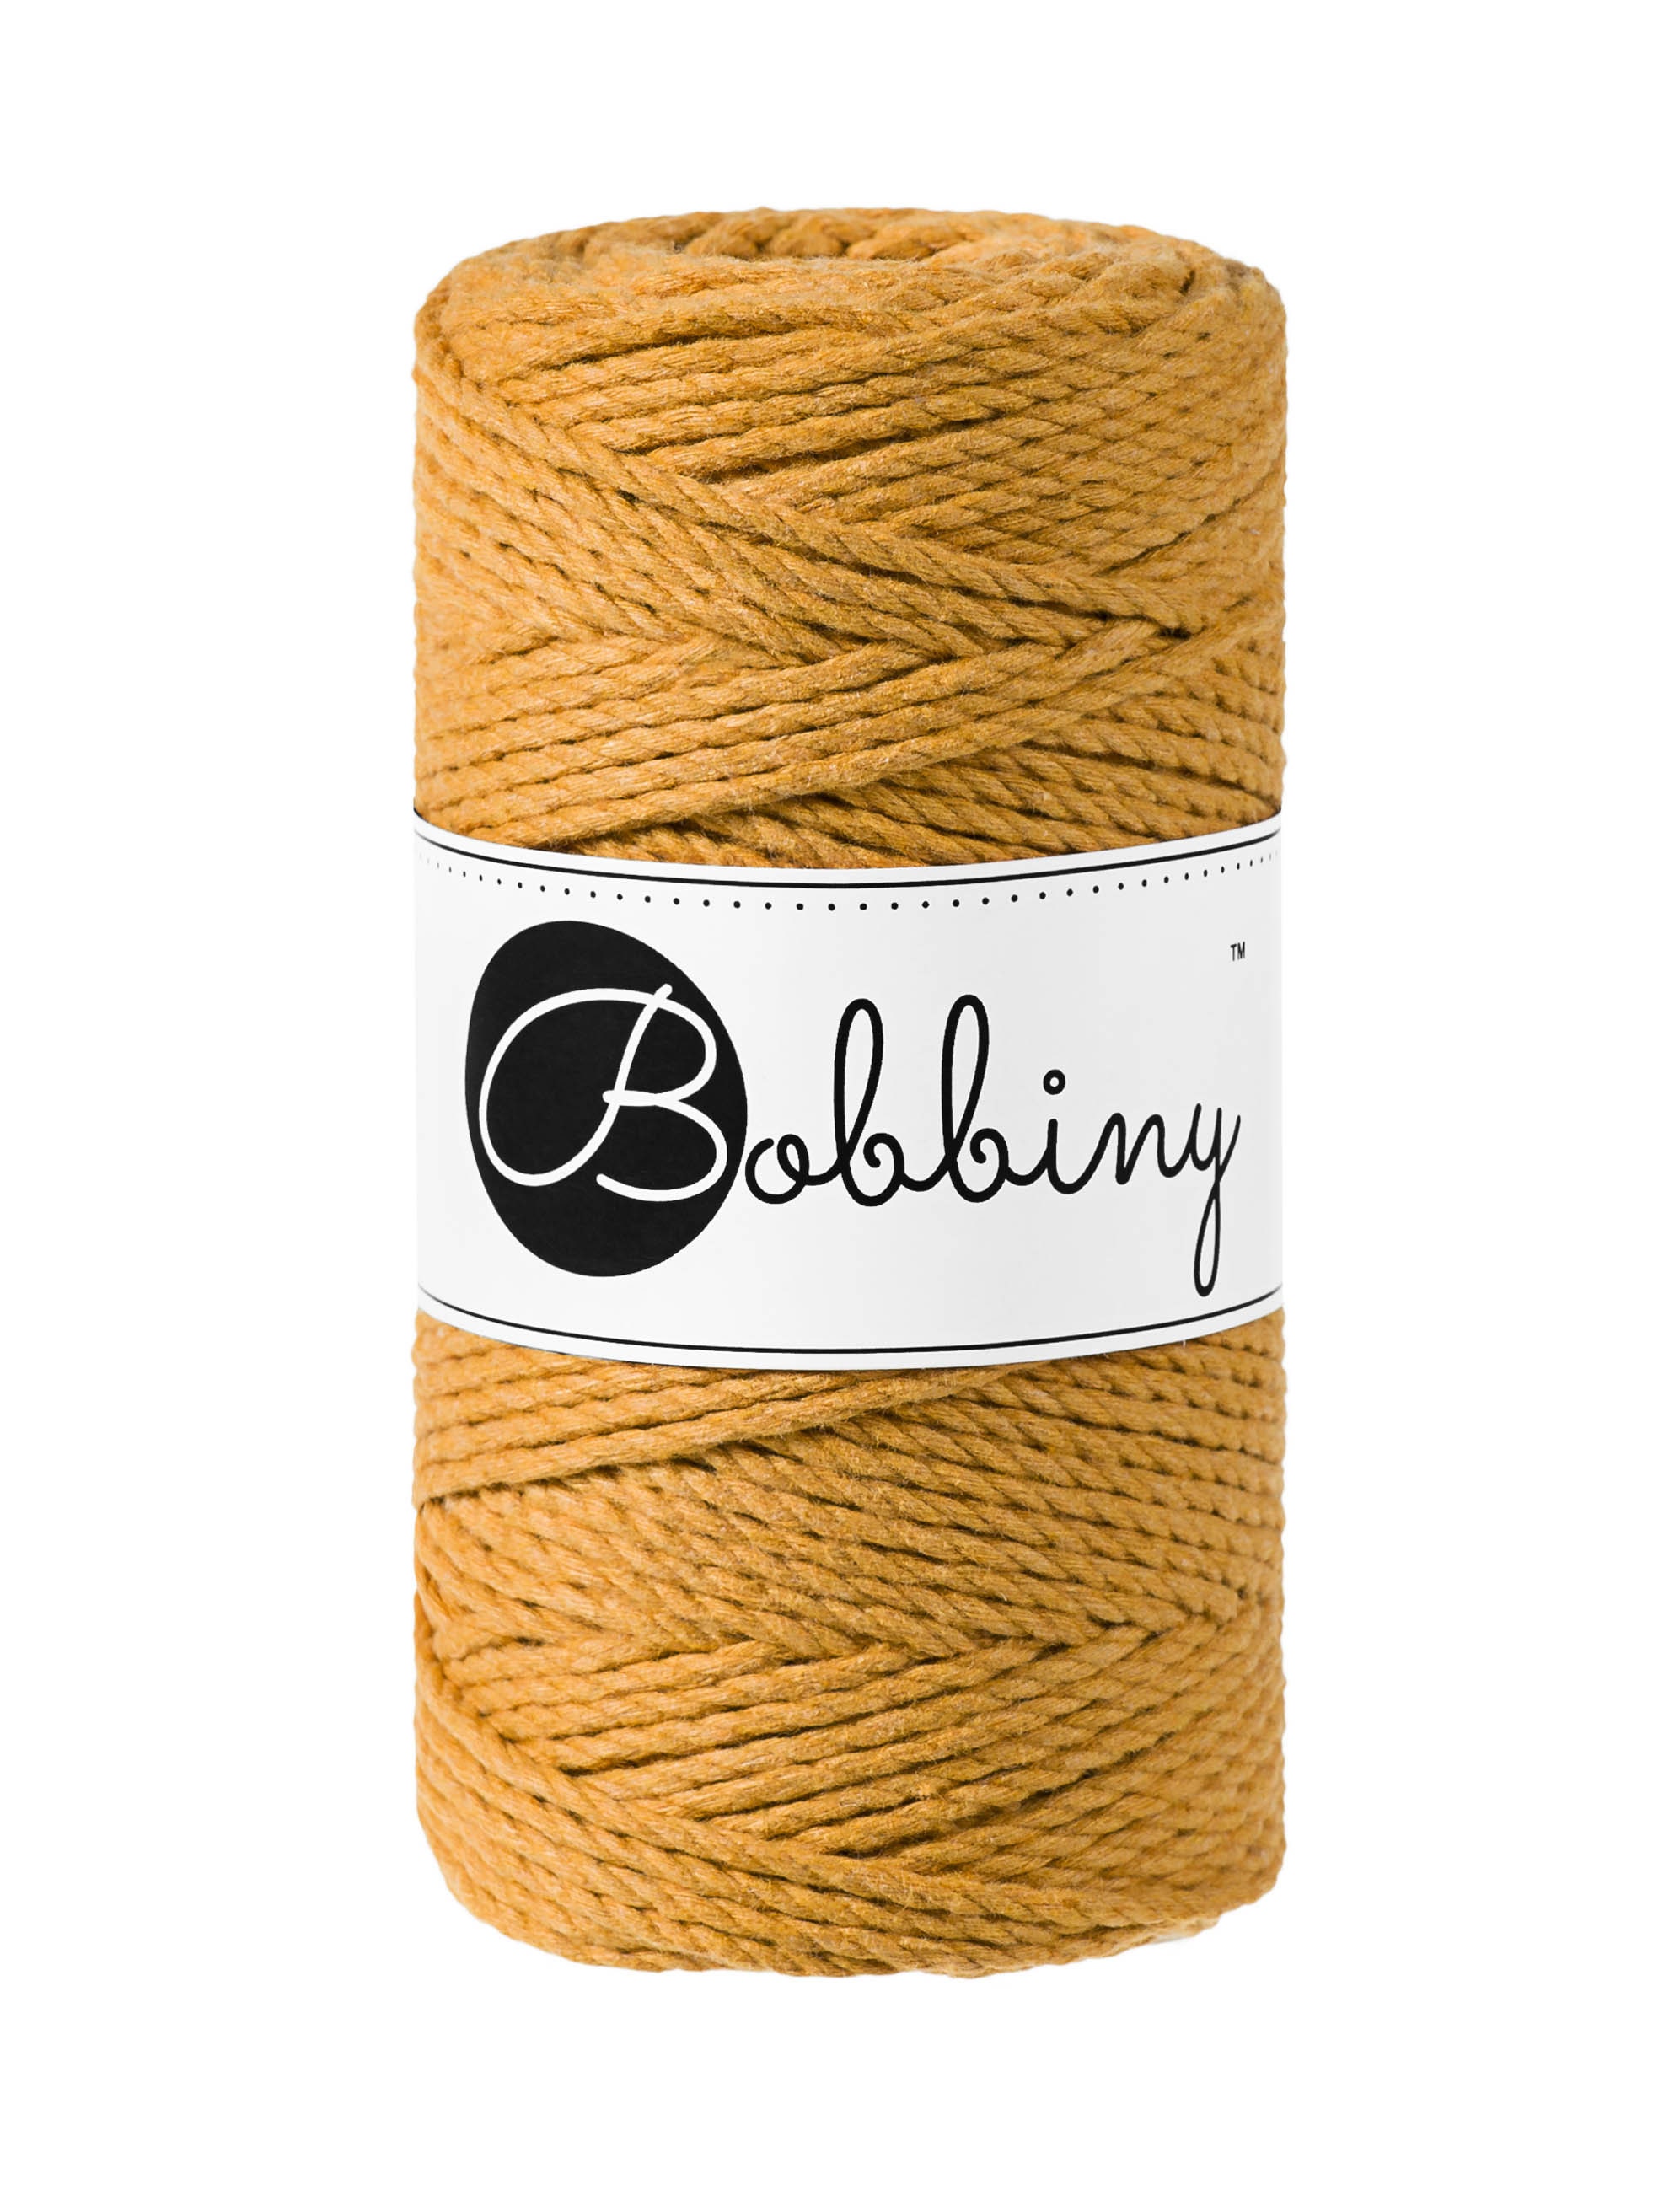 4mm Macrame Cotton Cord x 100m (109 Yards) 4ply Twisted Rope for Macrame  Project